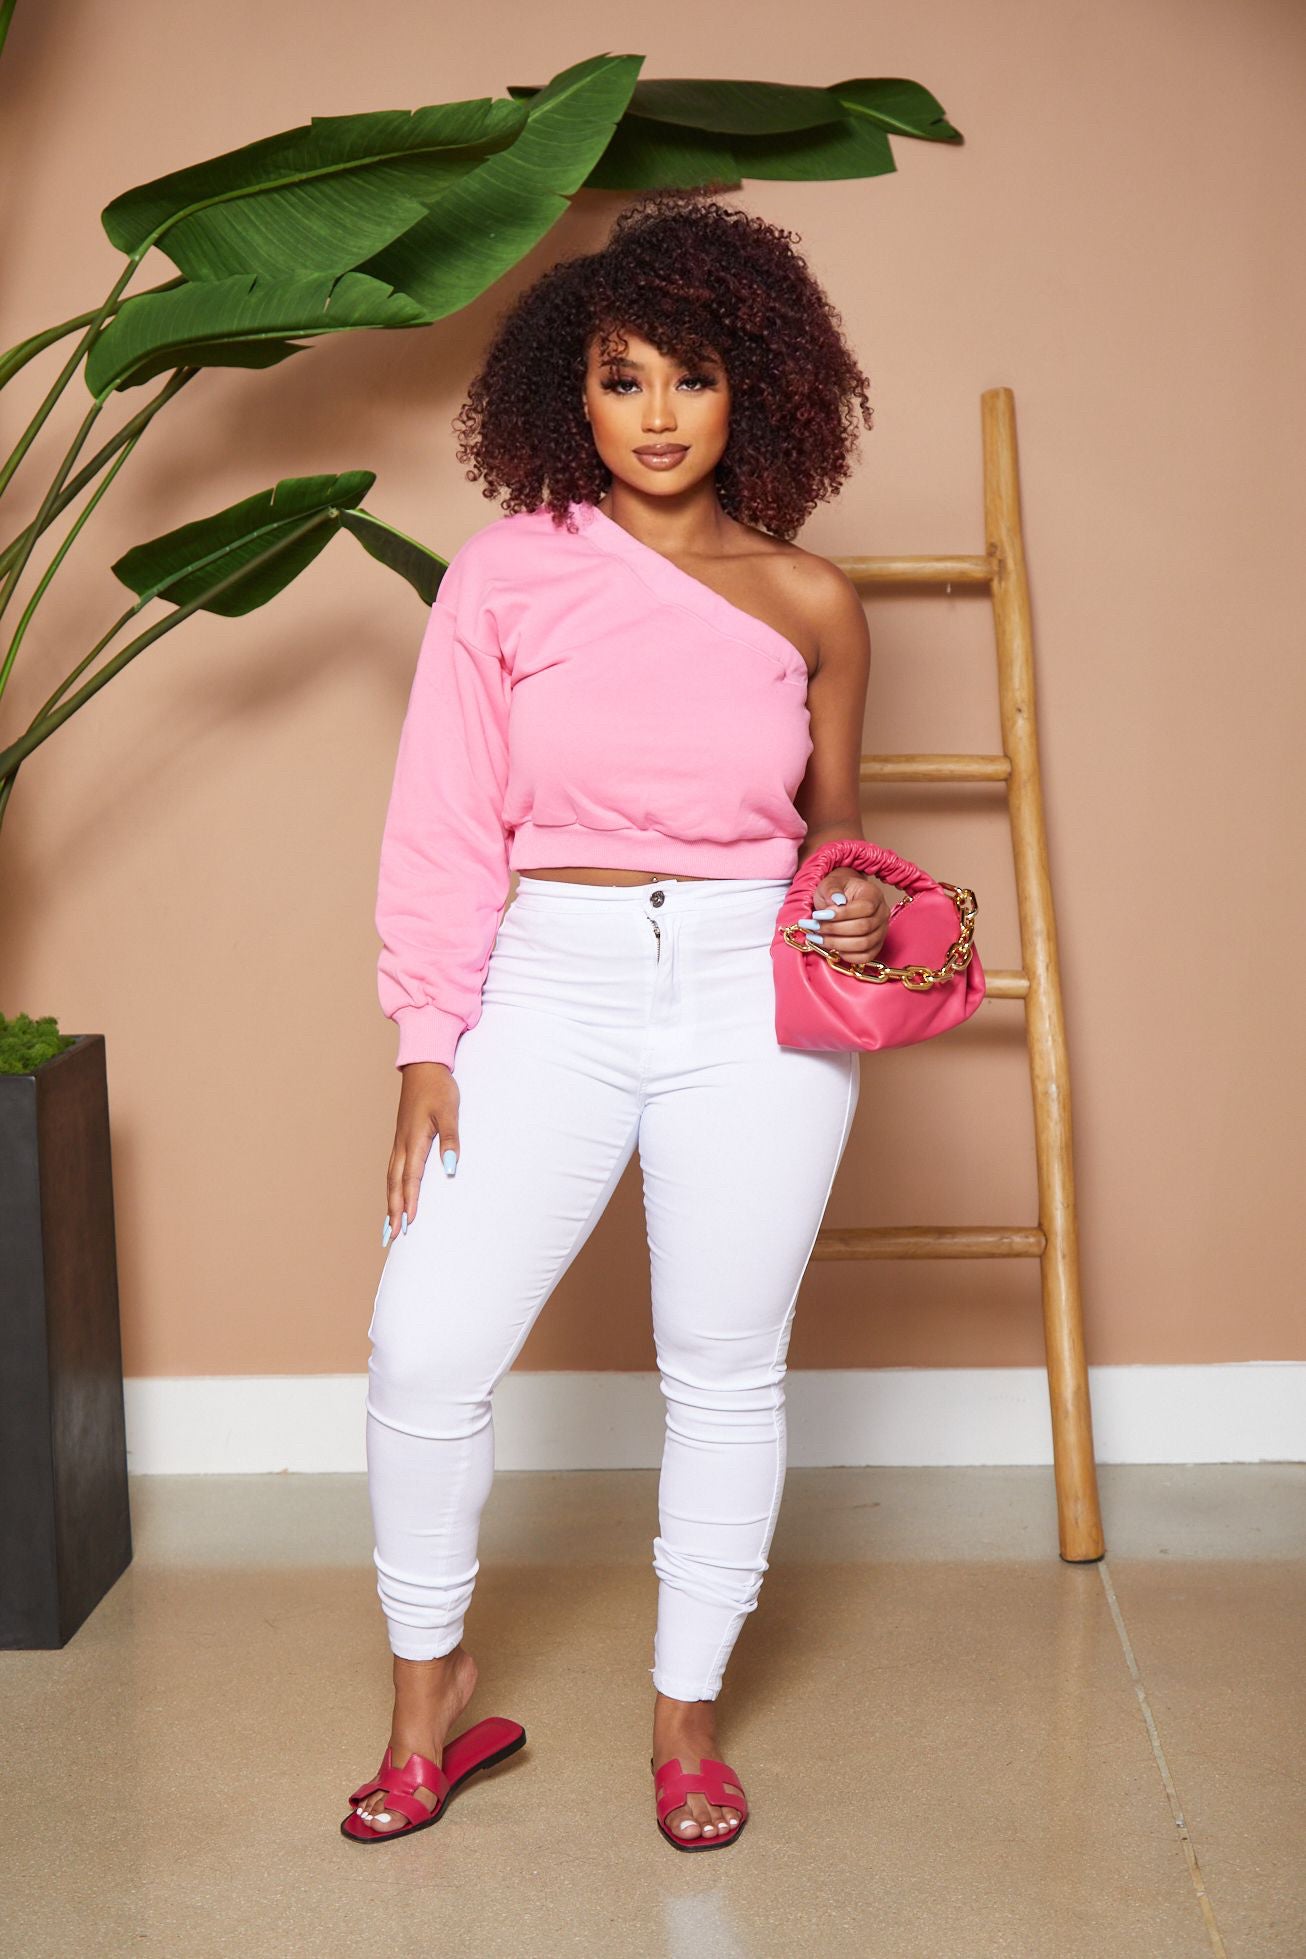 The “One Sleeve” Pink Top